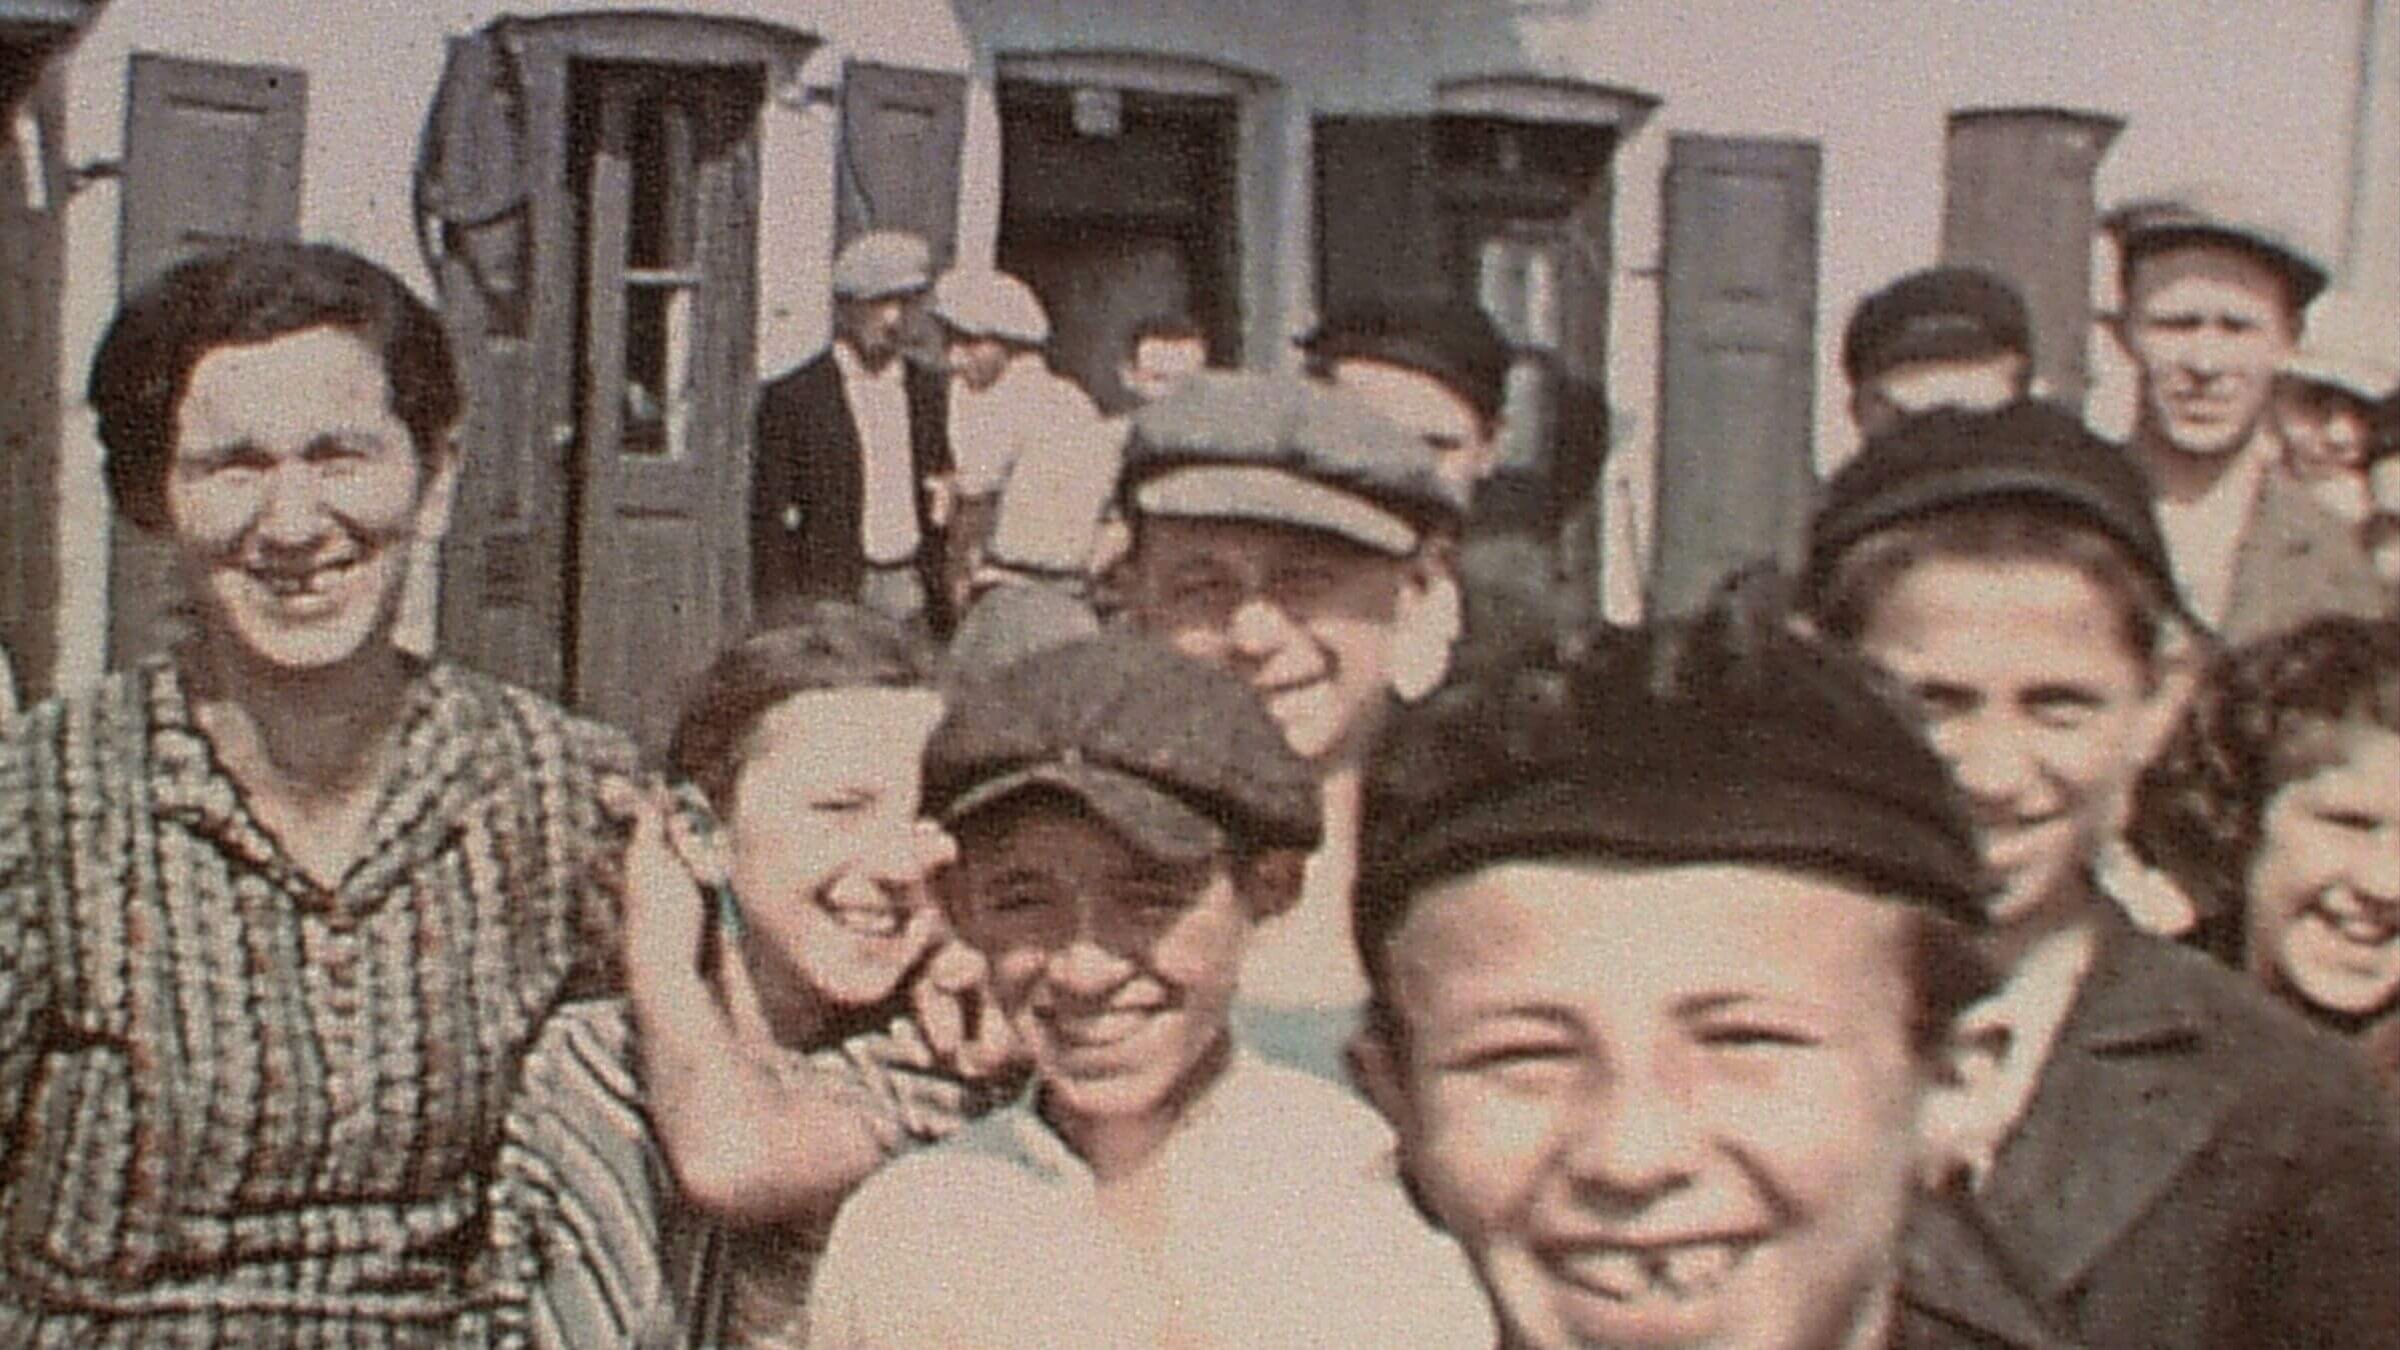 A single frame from David Kurtz's 1938 footage of Nasielsk, a small town in Poland.